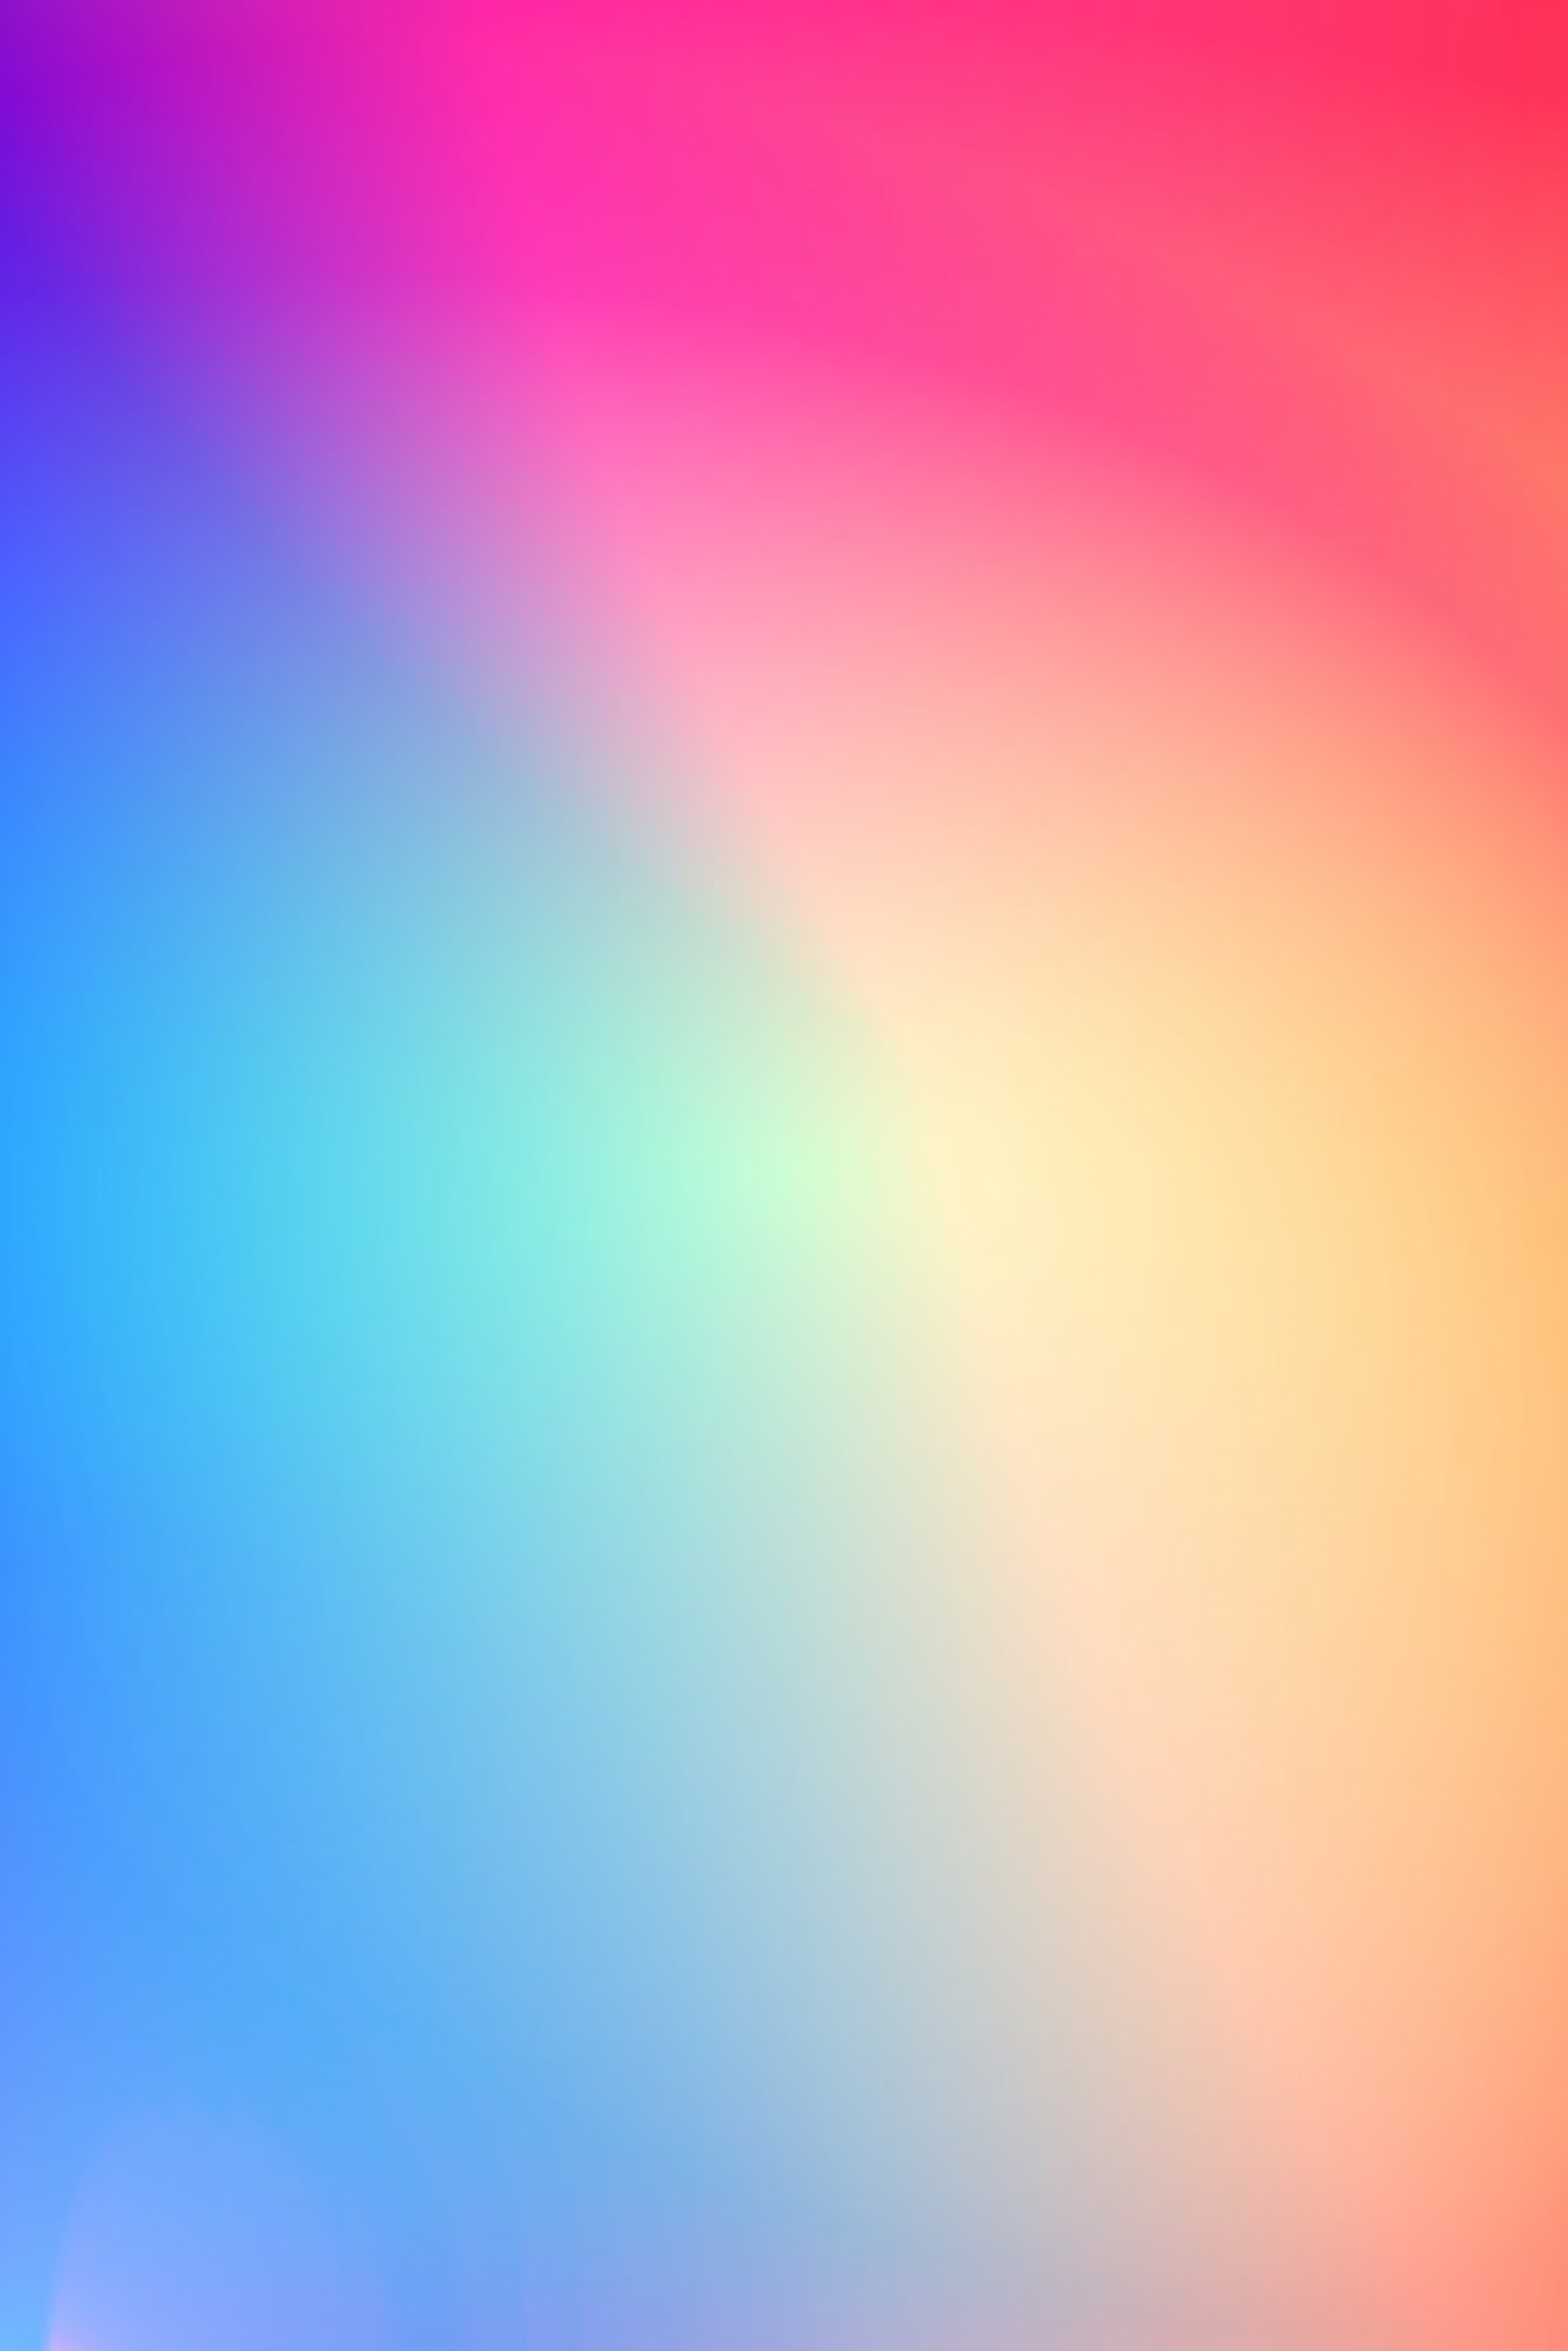 Colorful Gradient wallpaper for Apple iPhone, Mac, iPad and more